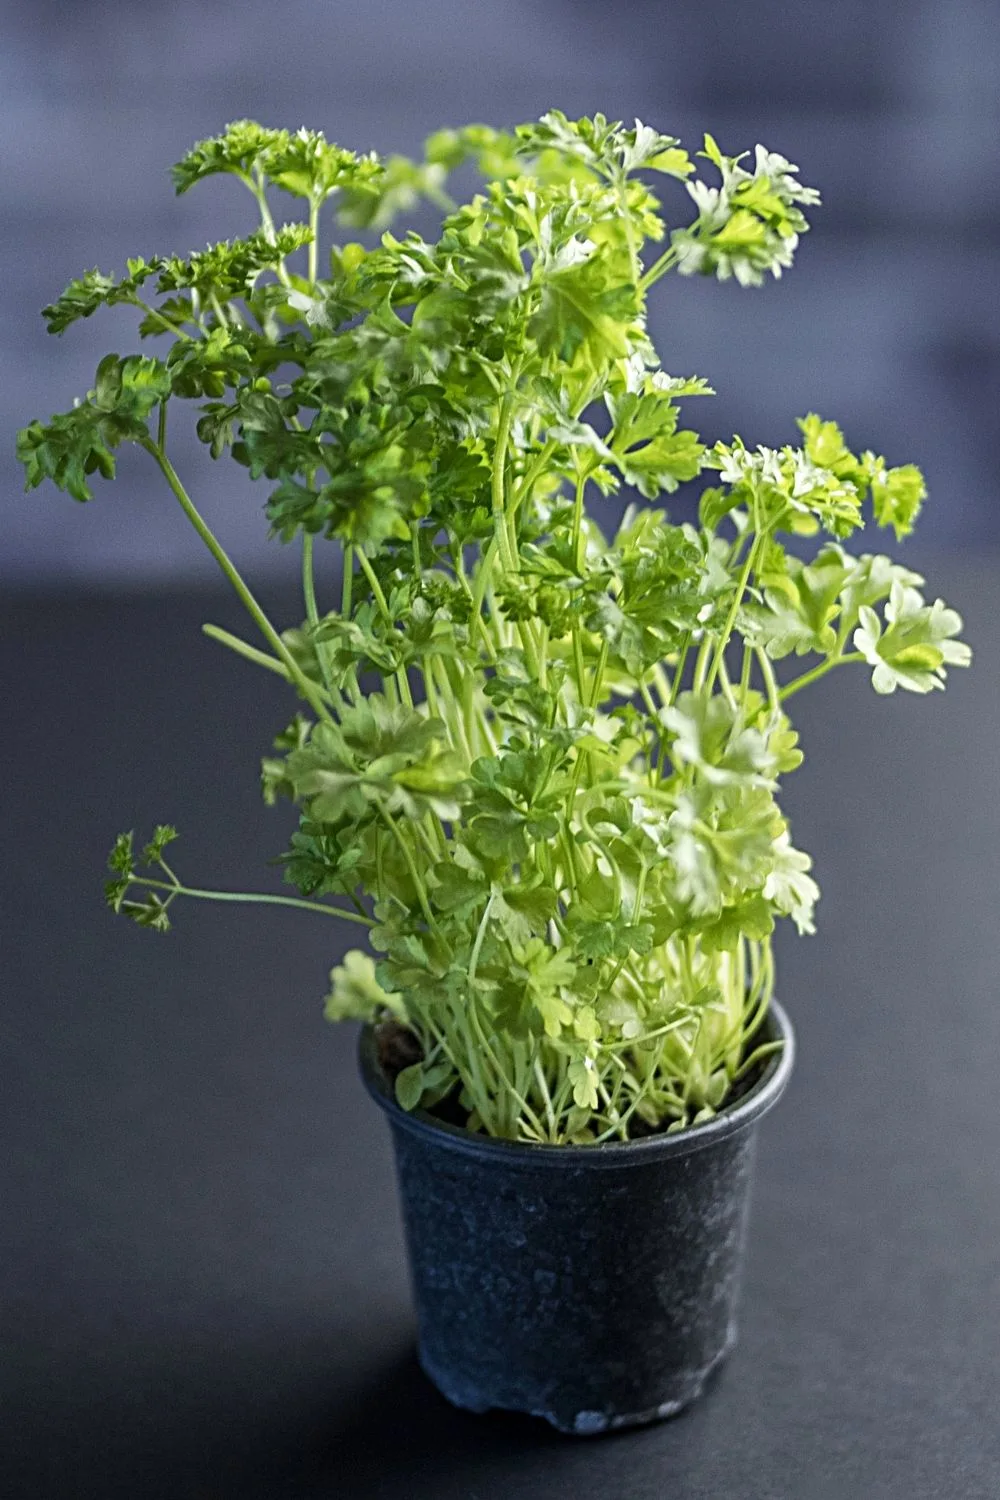 Parsley, another common herb added to food, can be grown in pots on an east-facing balcony